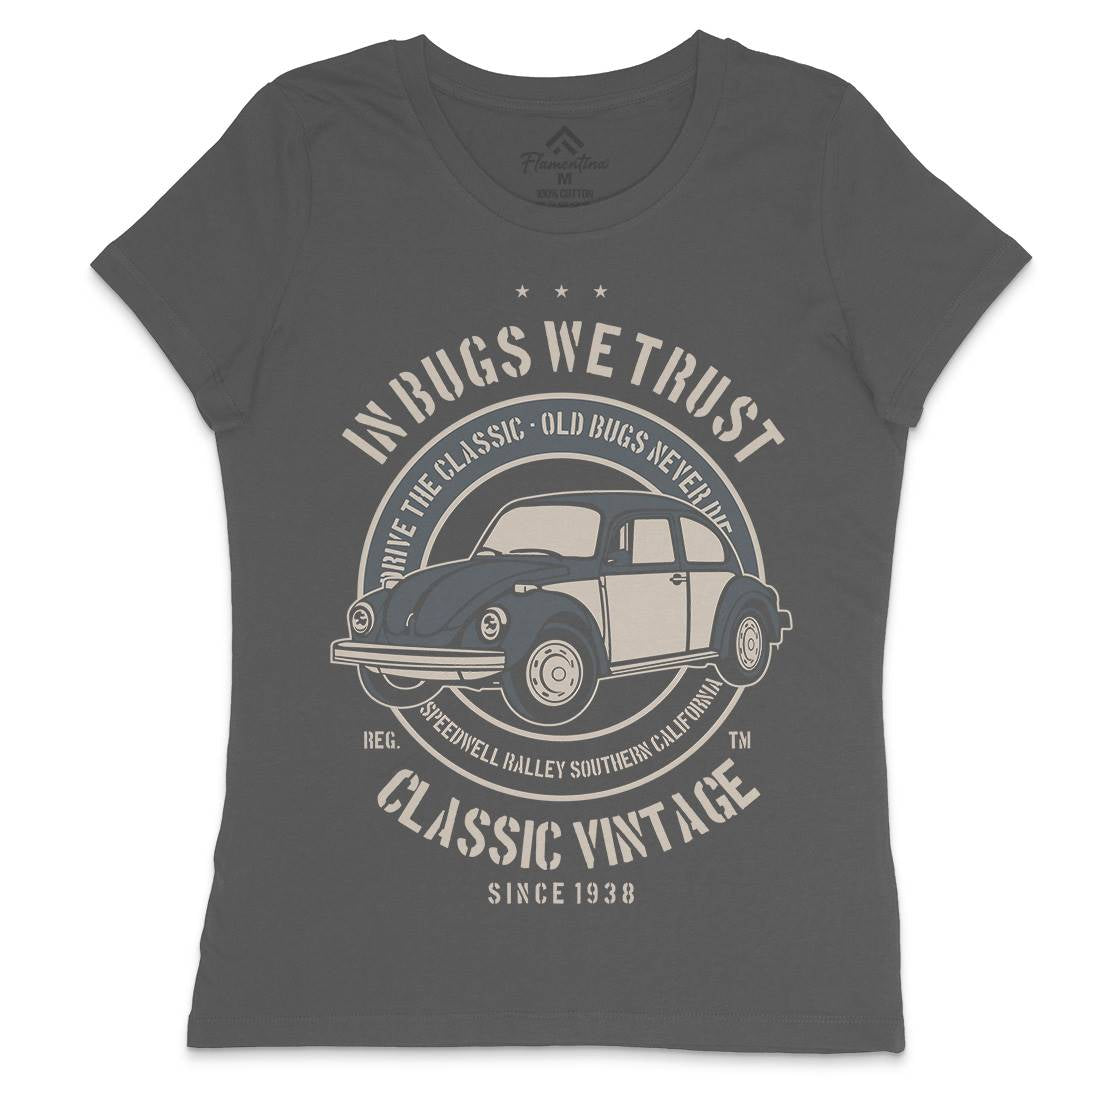 In Bugs We Trust Womens Crew Neck T-Shirt Cars B223